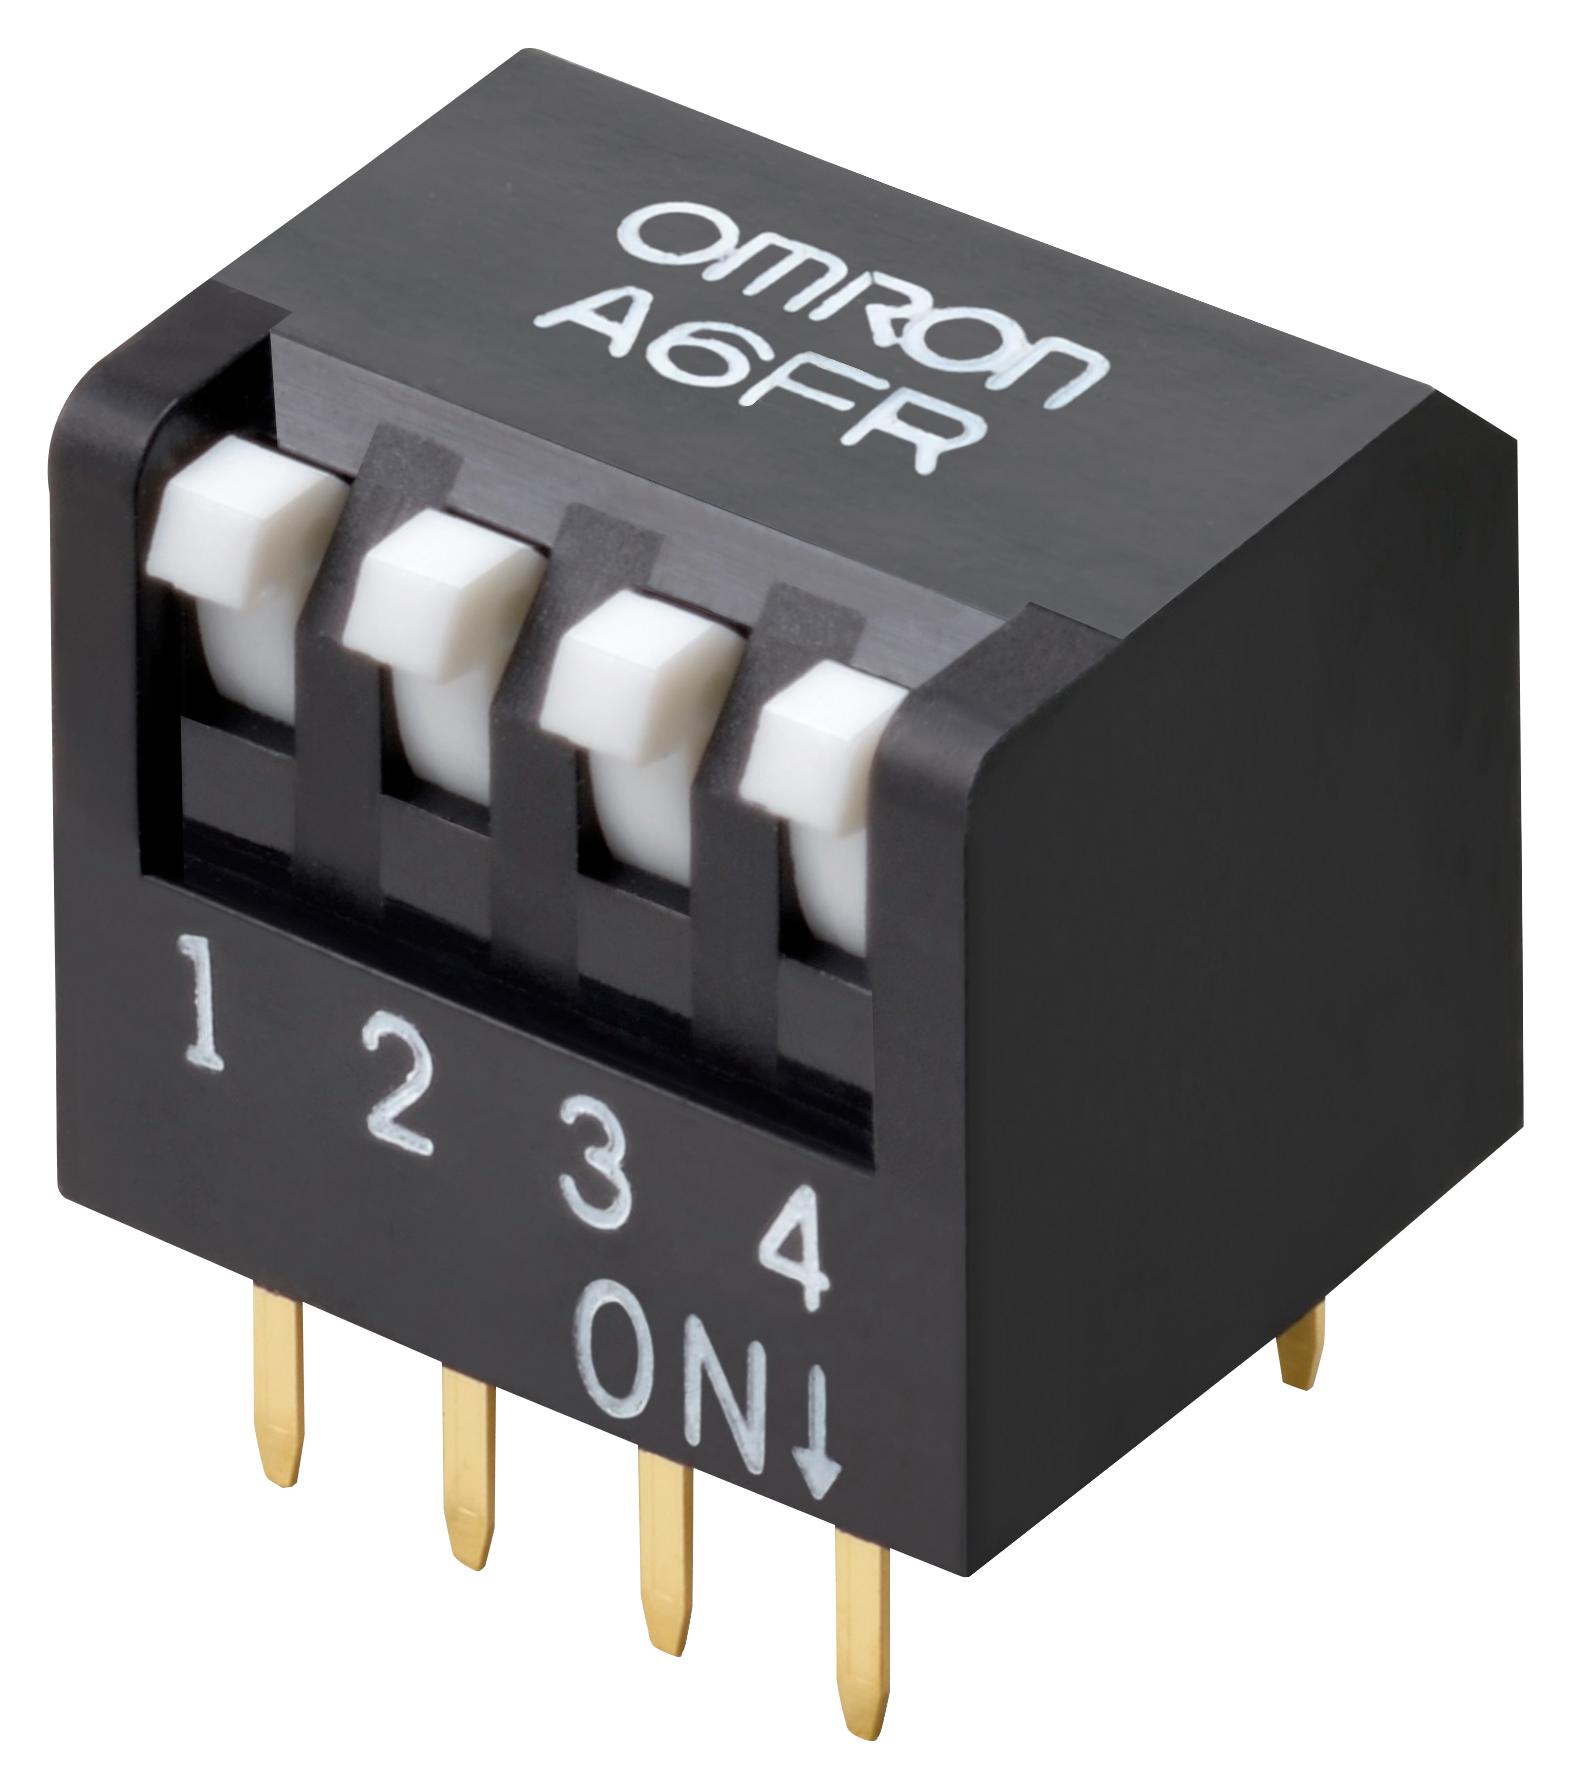 A6FR-7101 DIP SWITCH, 7POS, SPST, PIANO KEY, TH OMRON